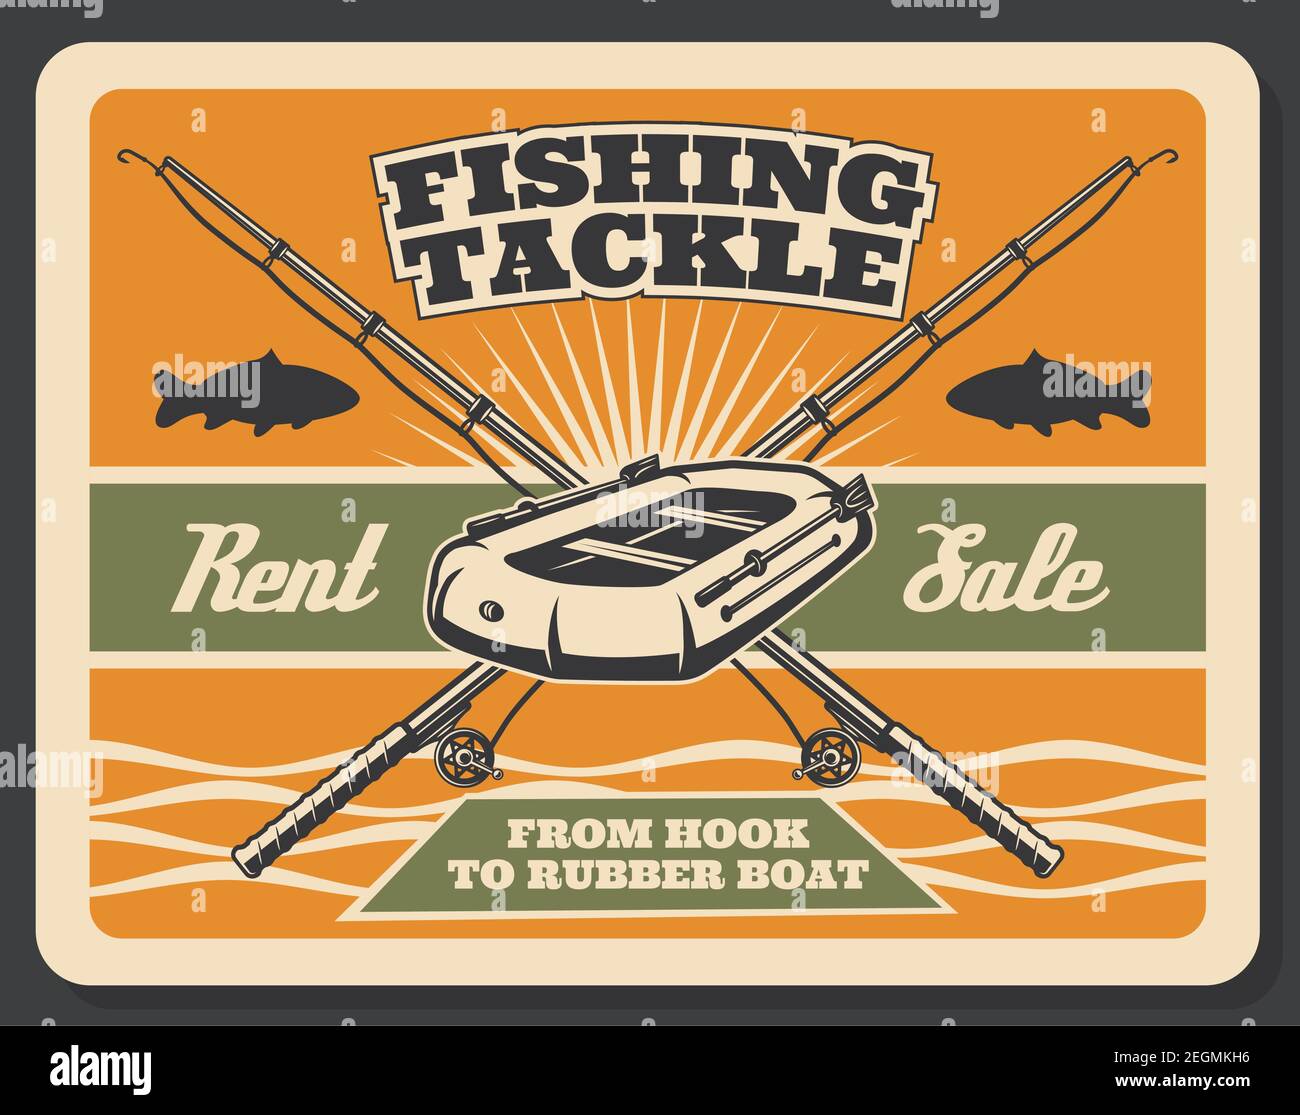 https://c8.alamy.com/comp/2EGMKH6/fishing-store-for-tackles-and-fisher-baits-equipment-vintage-poster-vector-retro-design-of-fish-rod-and-mackerel-trout-or-flounder-catch-inflatable-2EGMKH6.jpg